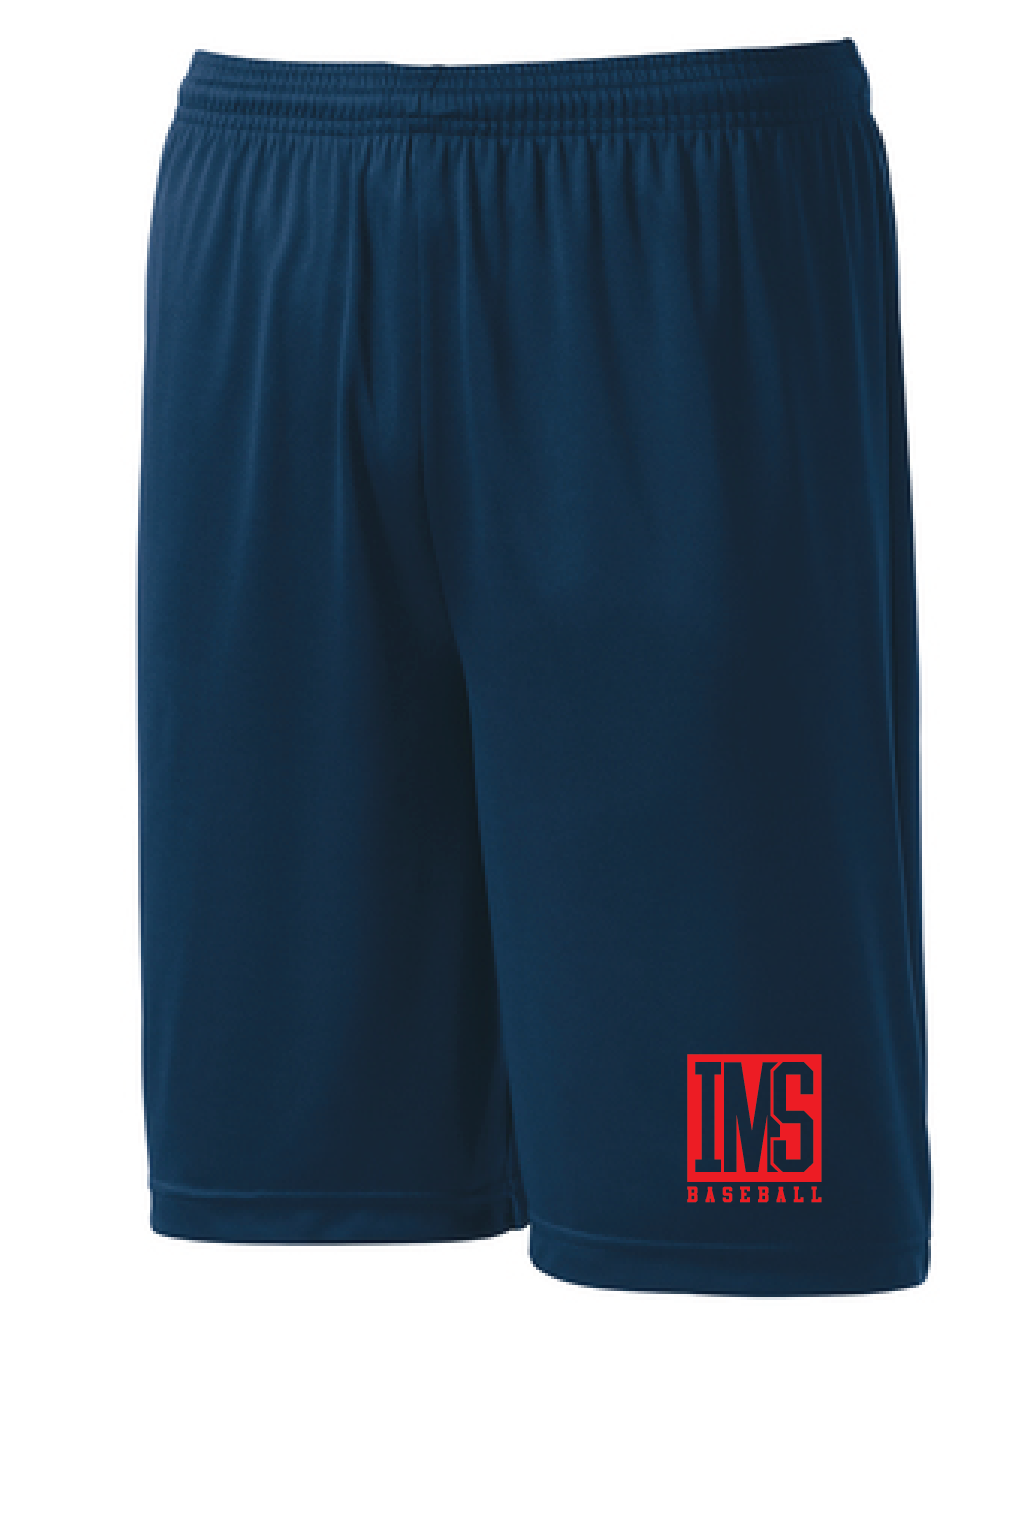 Competitor Short / Navy / Independence Middle School Baseball